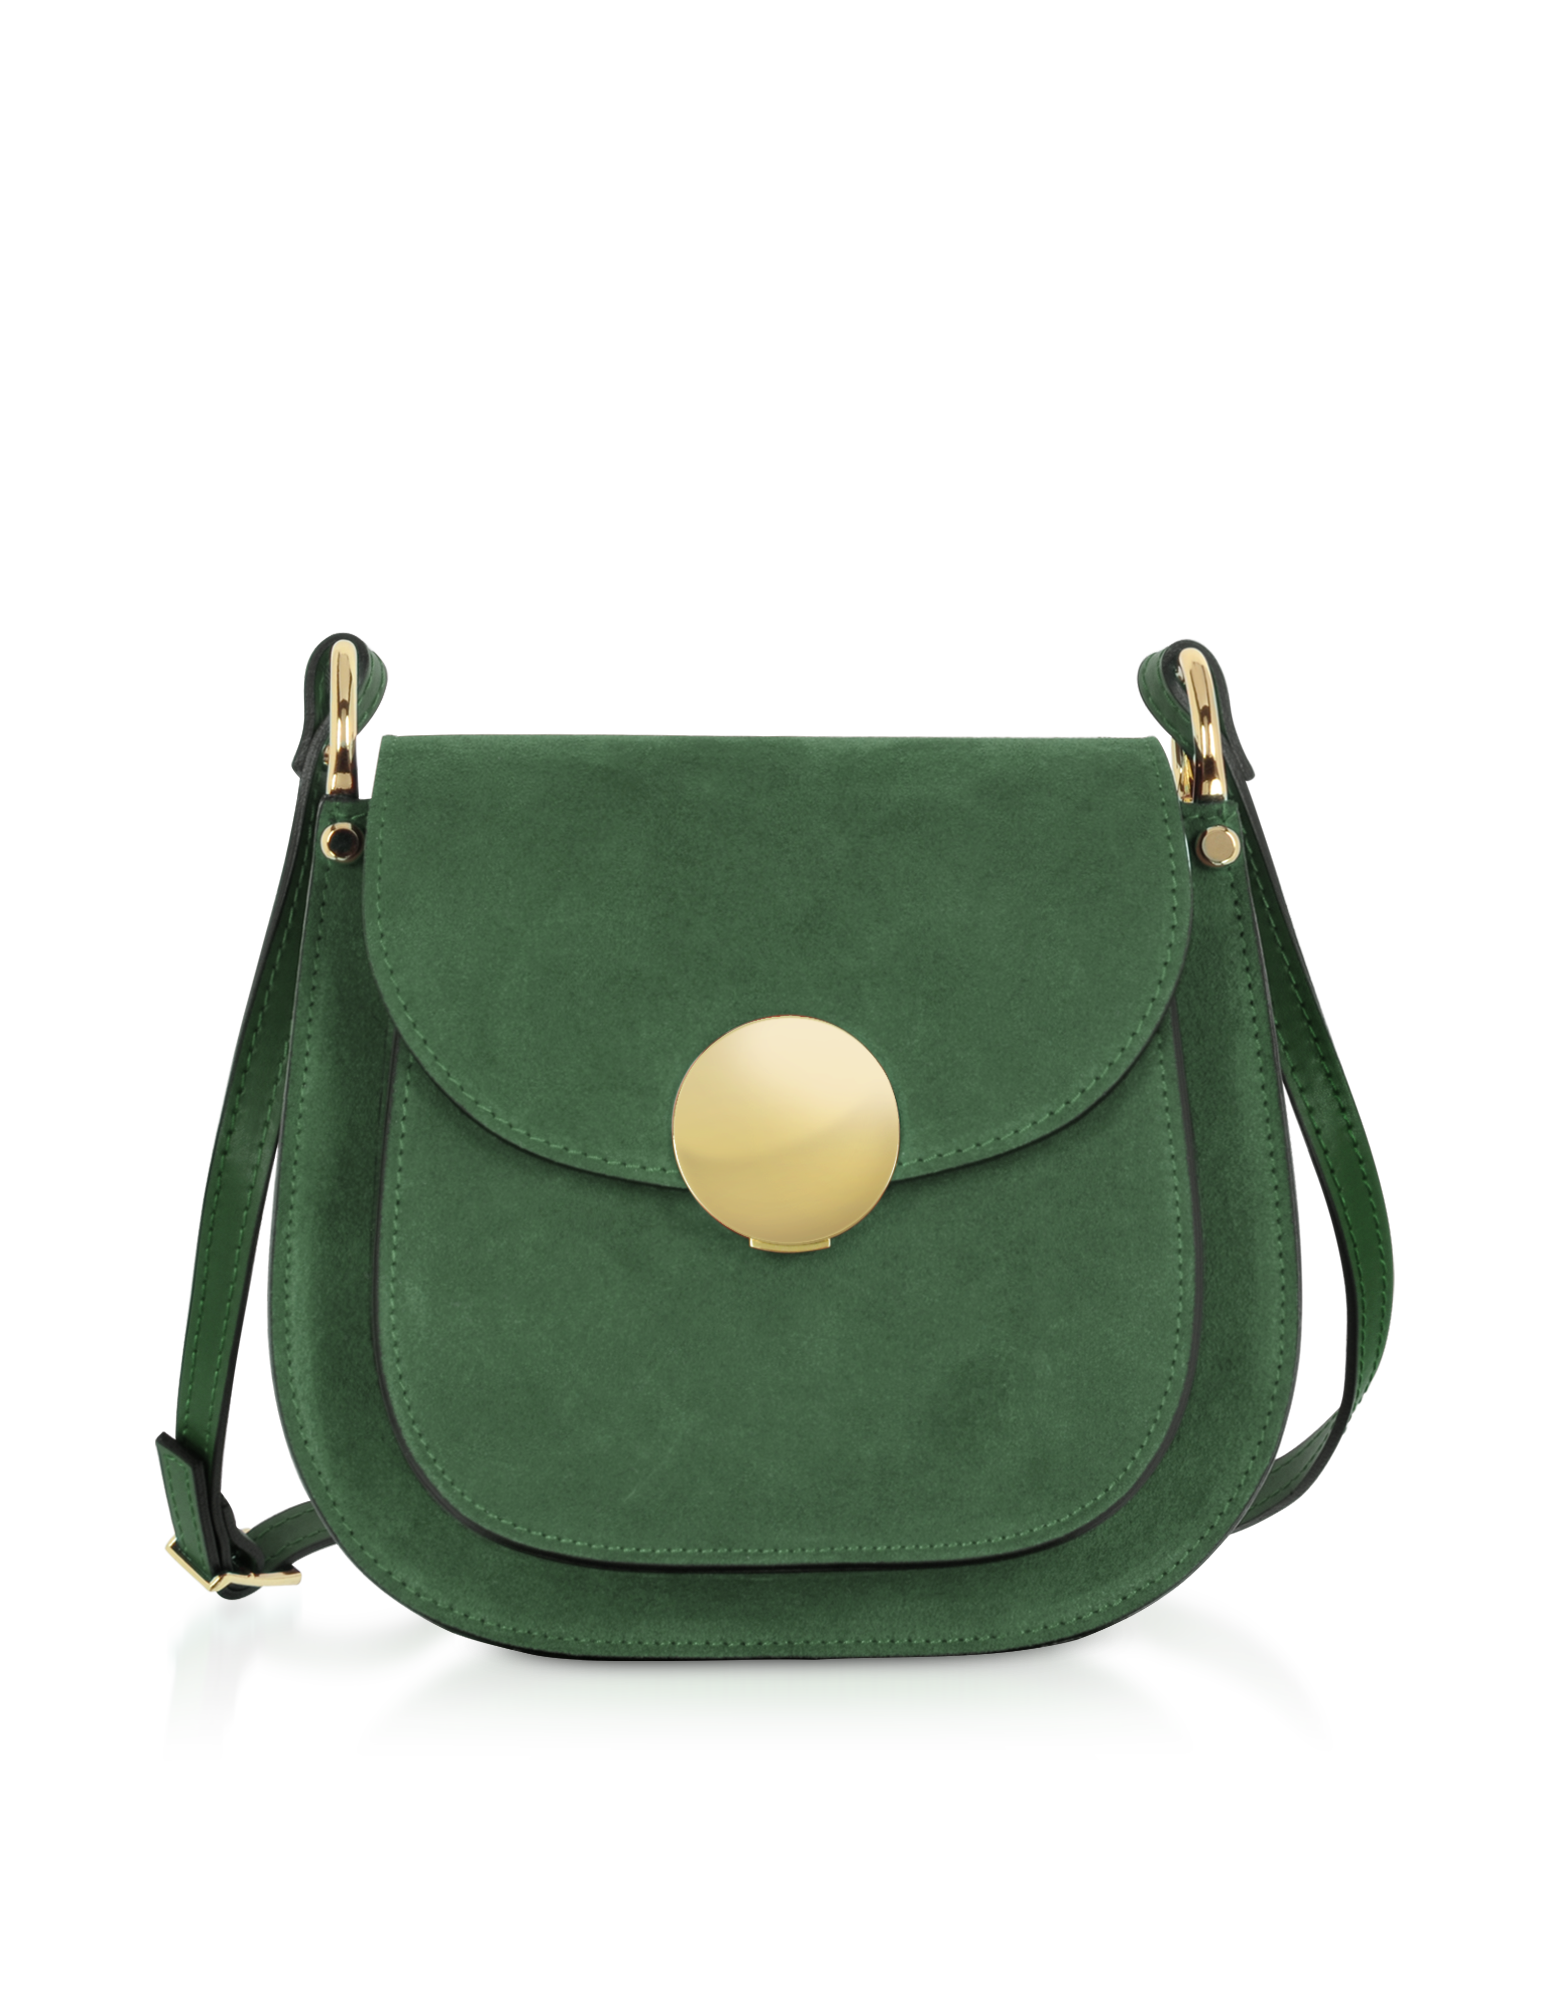 Agave Luxe Saddle Bag